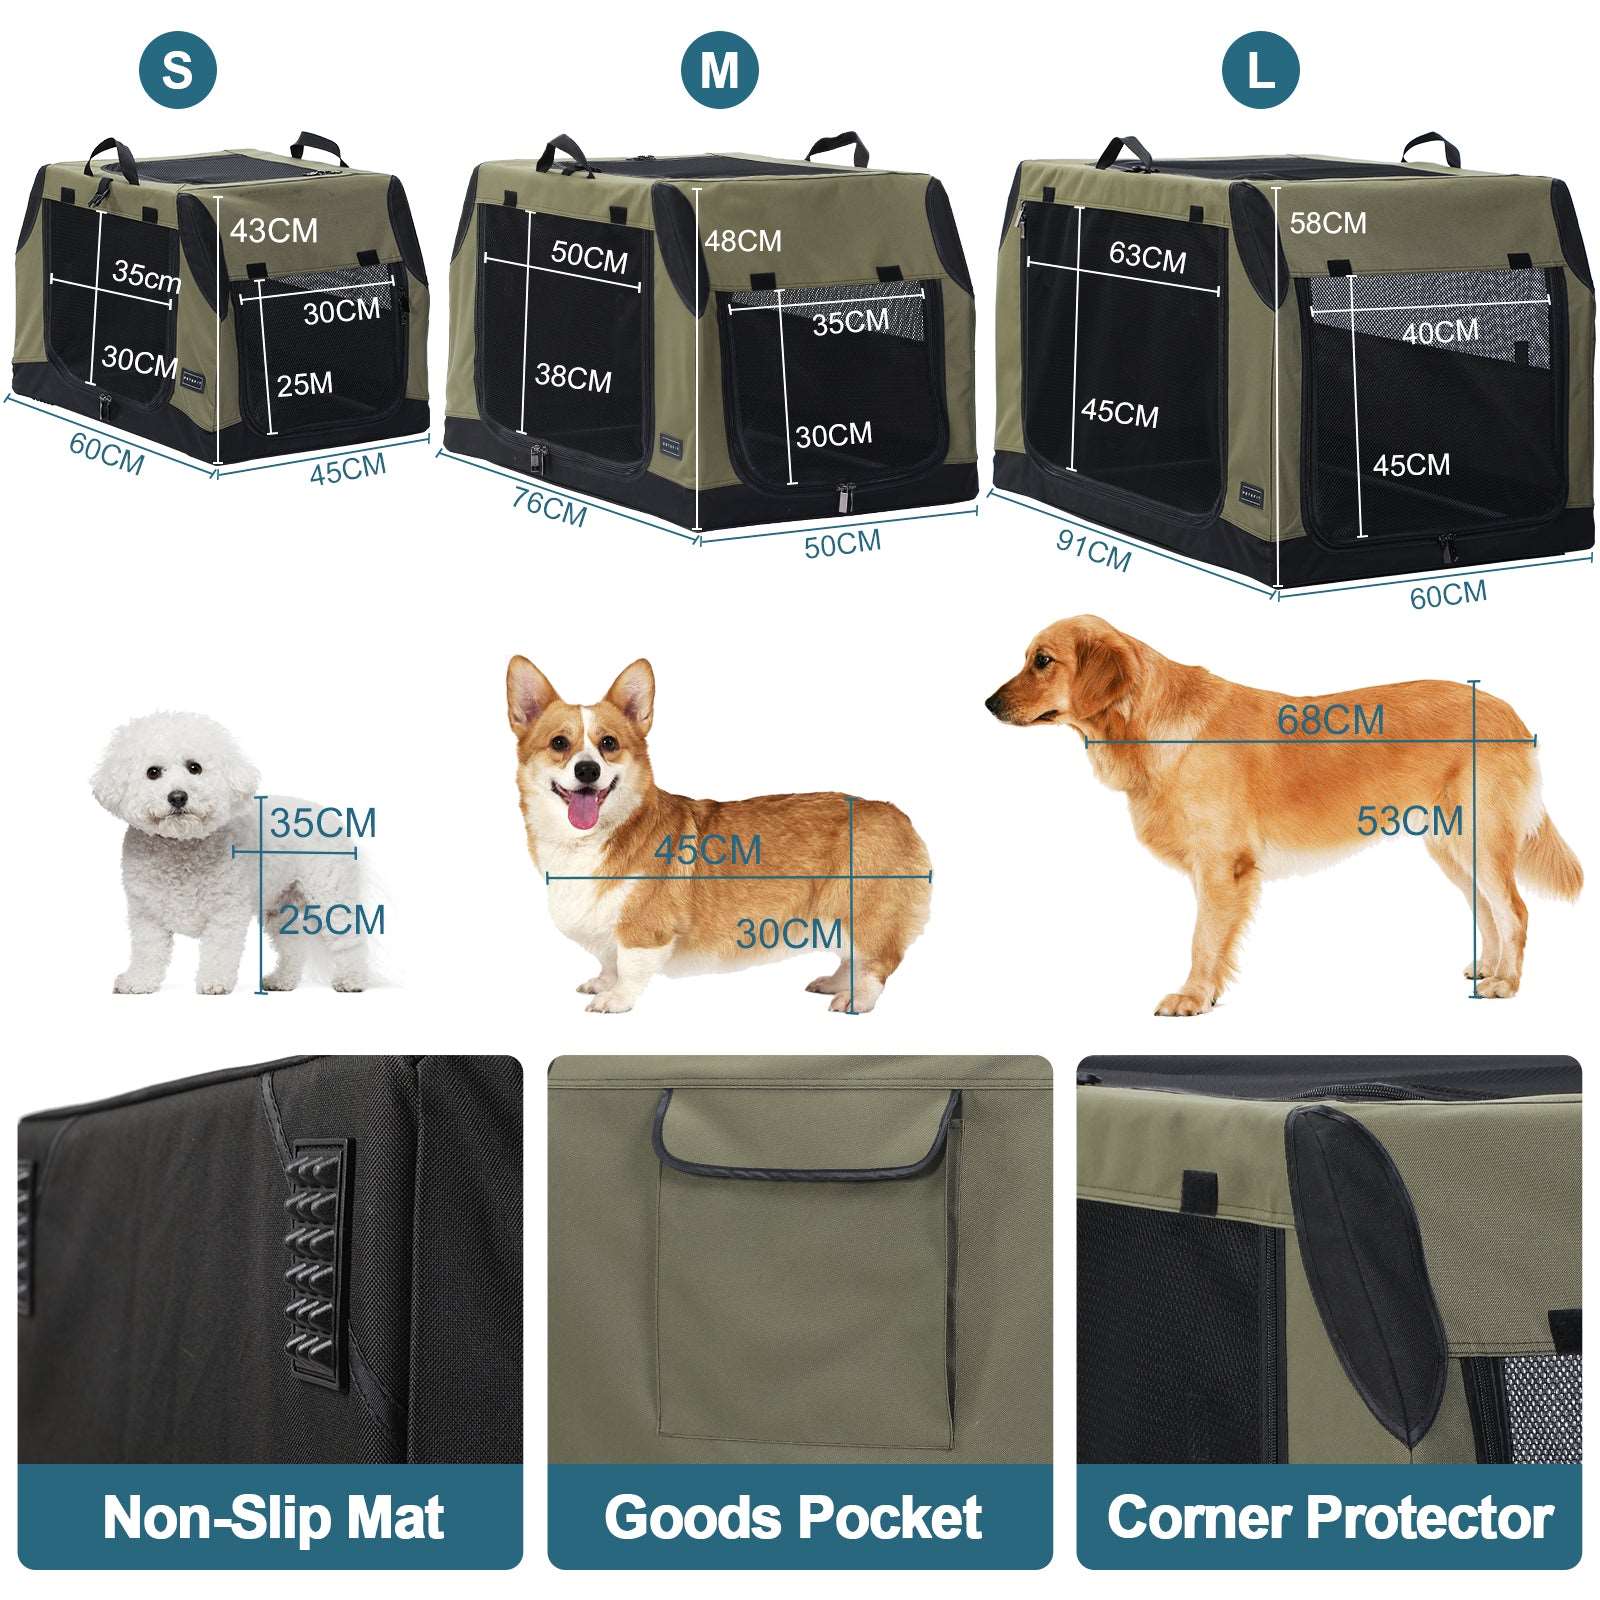 Petsfit-Soft-Sided-Portable-Travel-Kennel-for-Pet-02